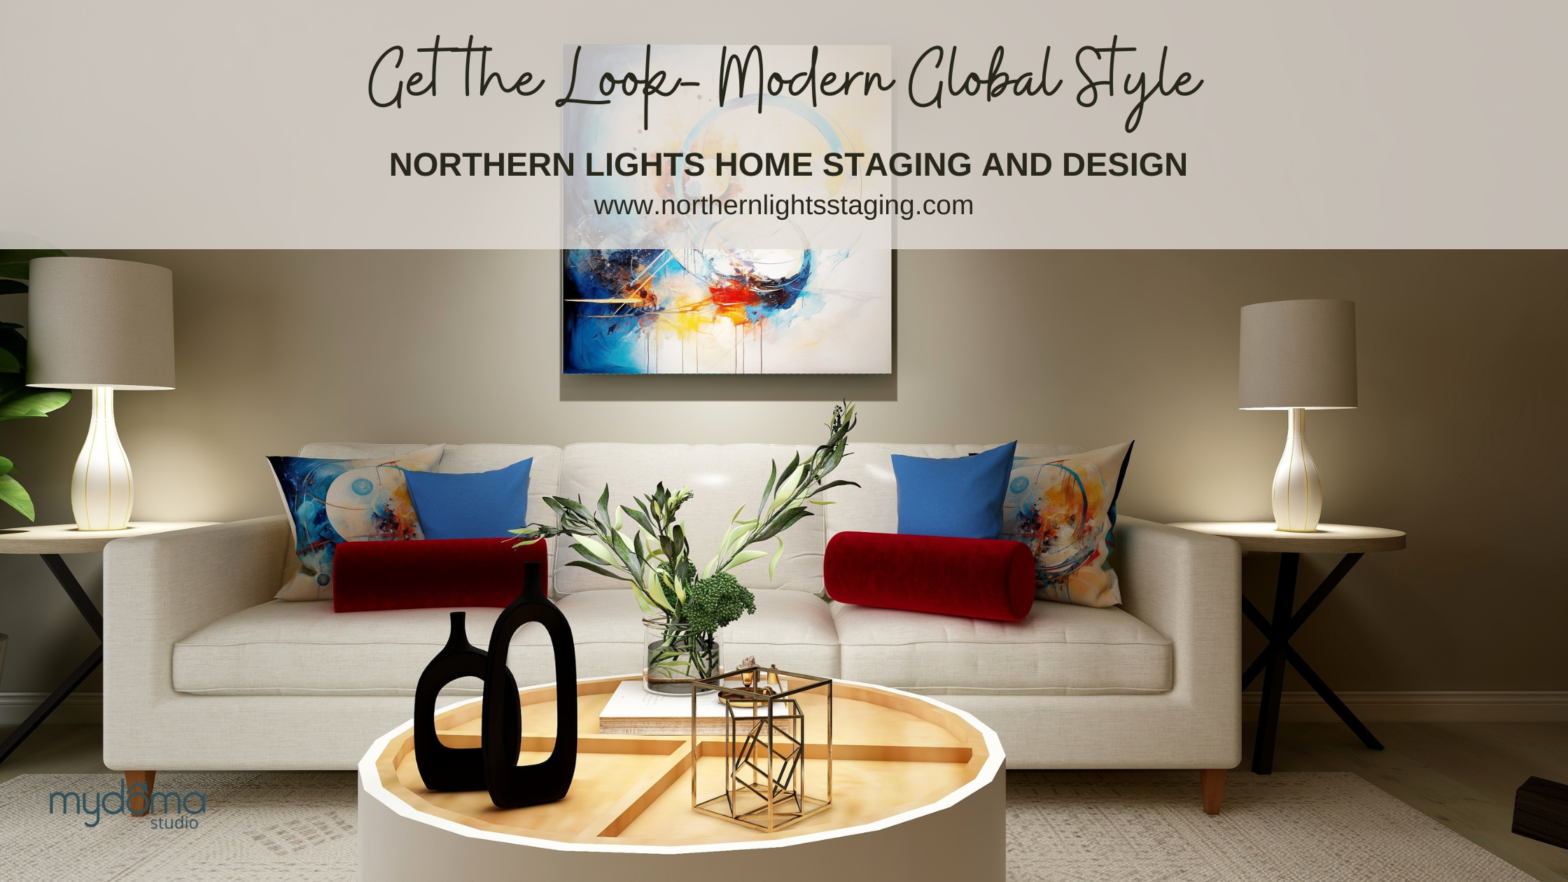 Get the Look- Modern Global Style Design